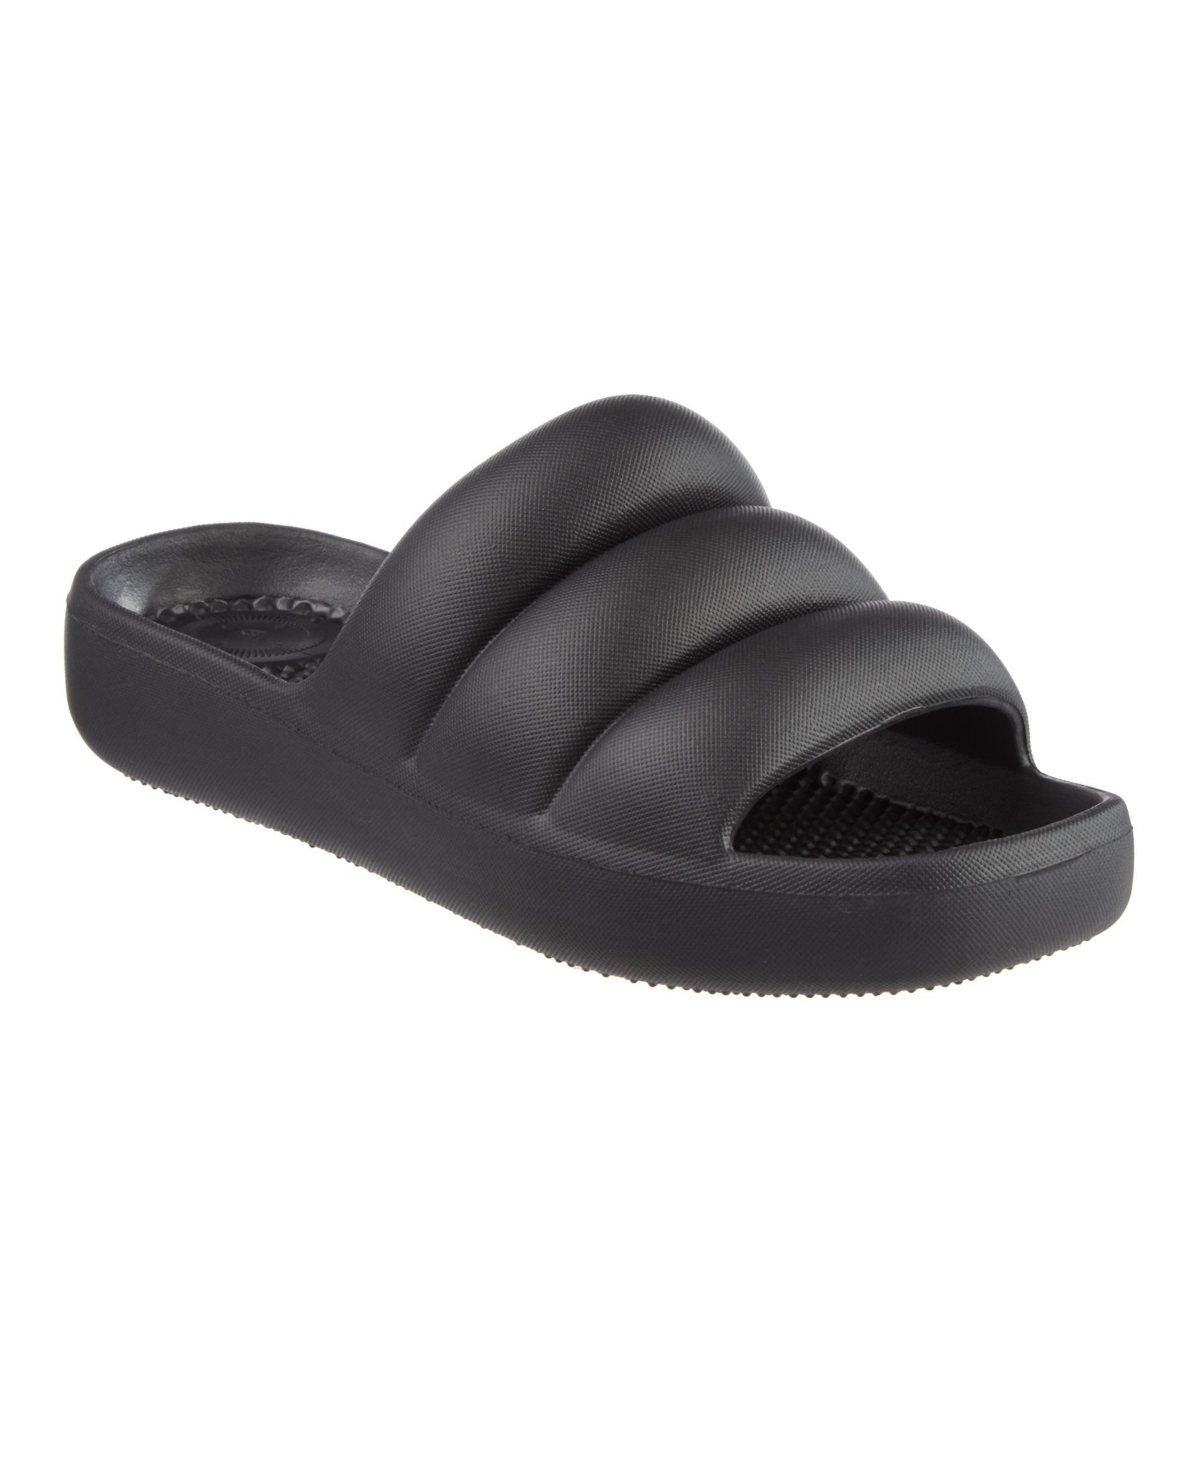 Totes Women's Molded Puffy Slide With Everywear In Black